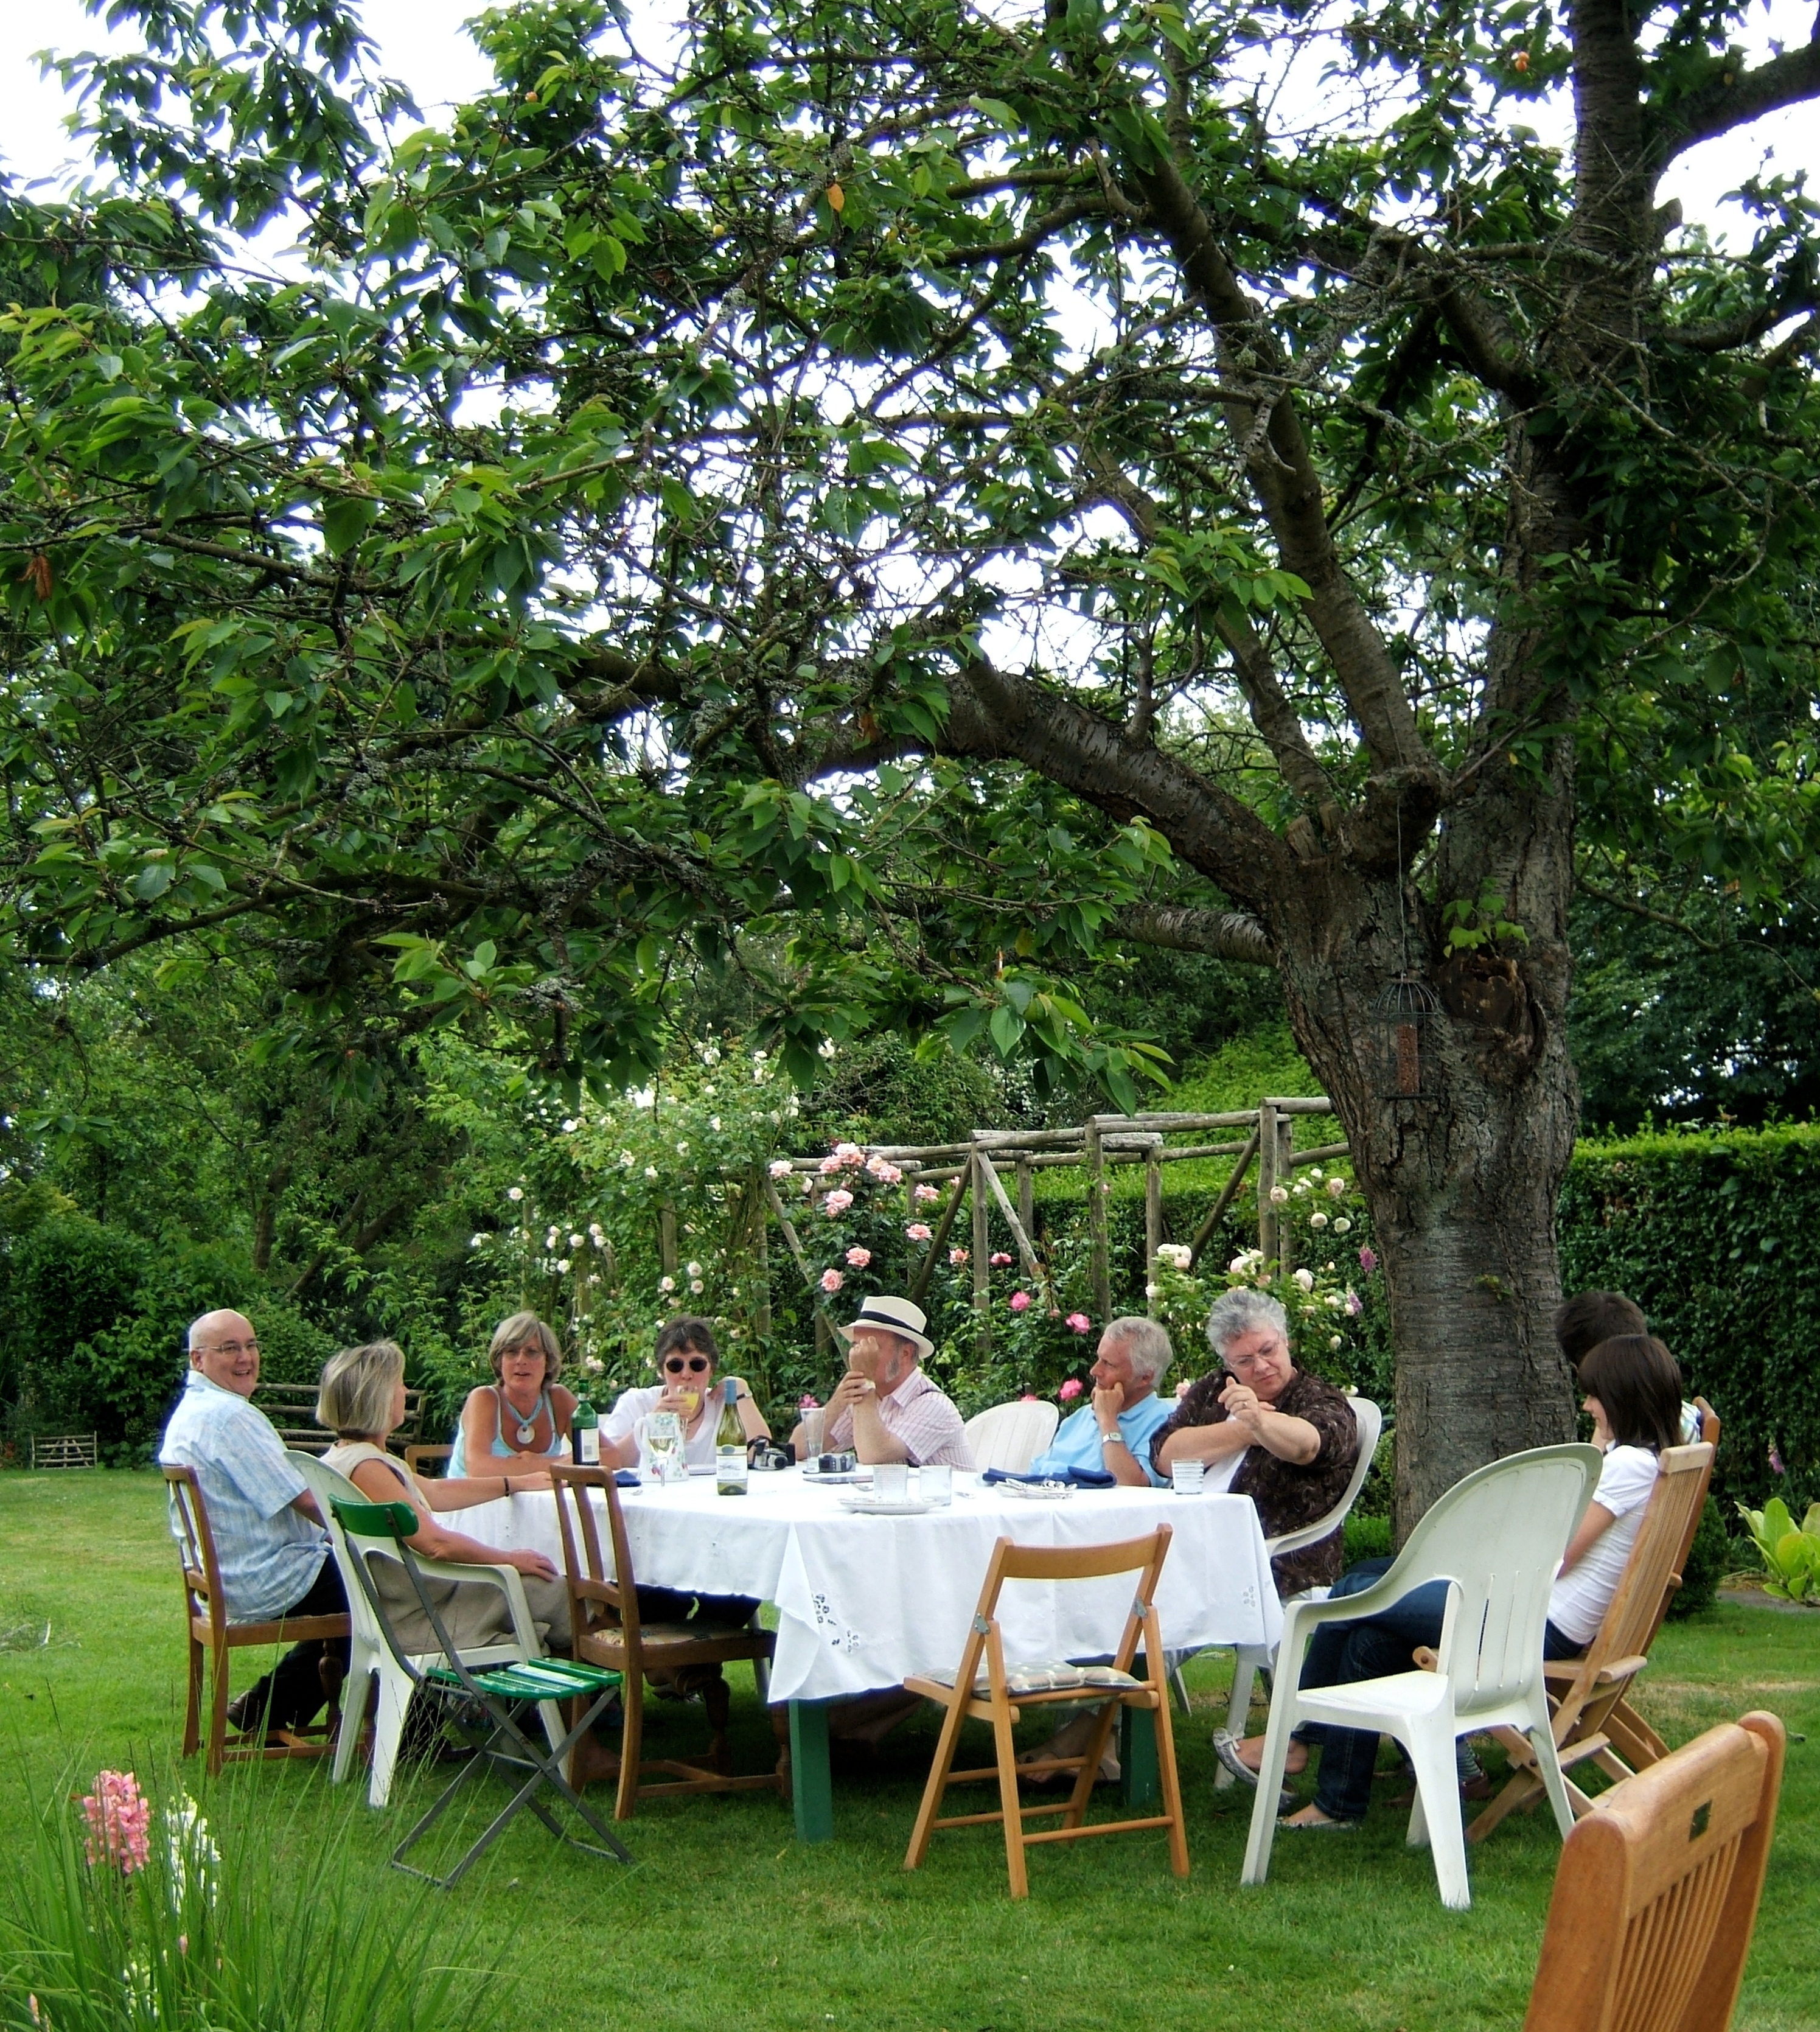 A family on a garden alfresco dining under the tree